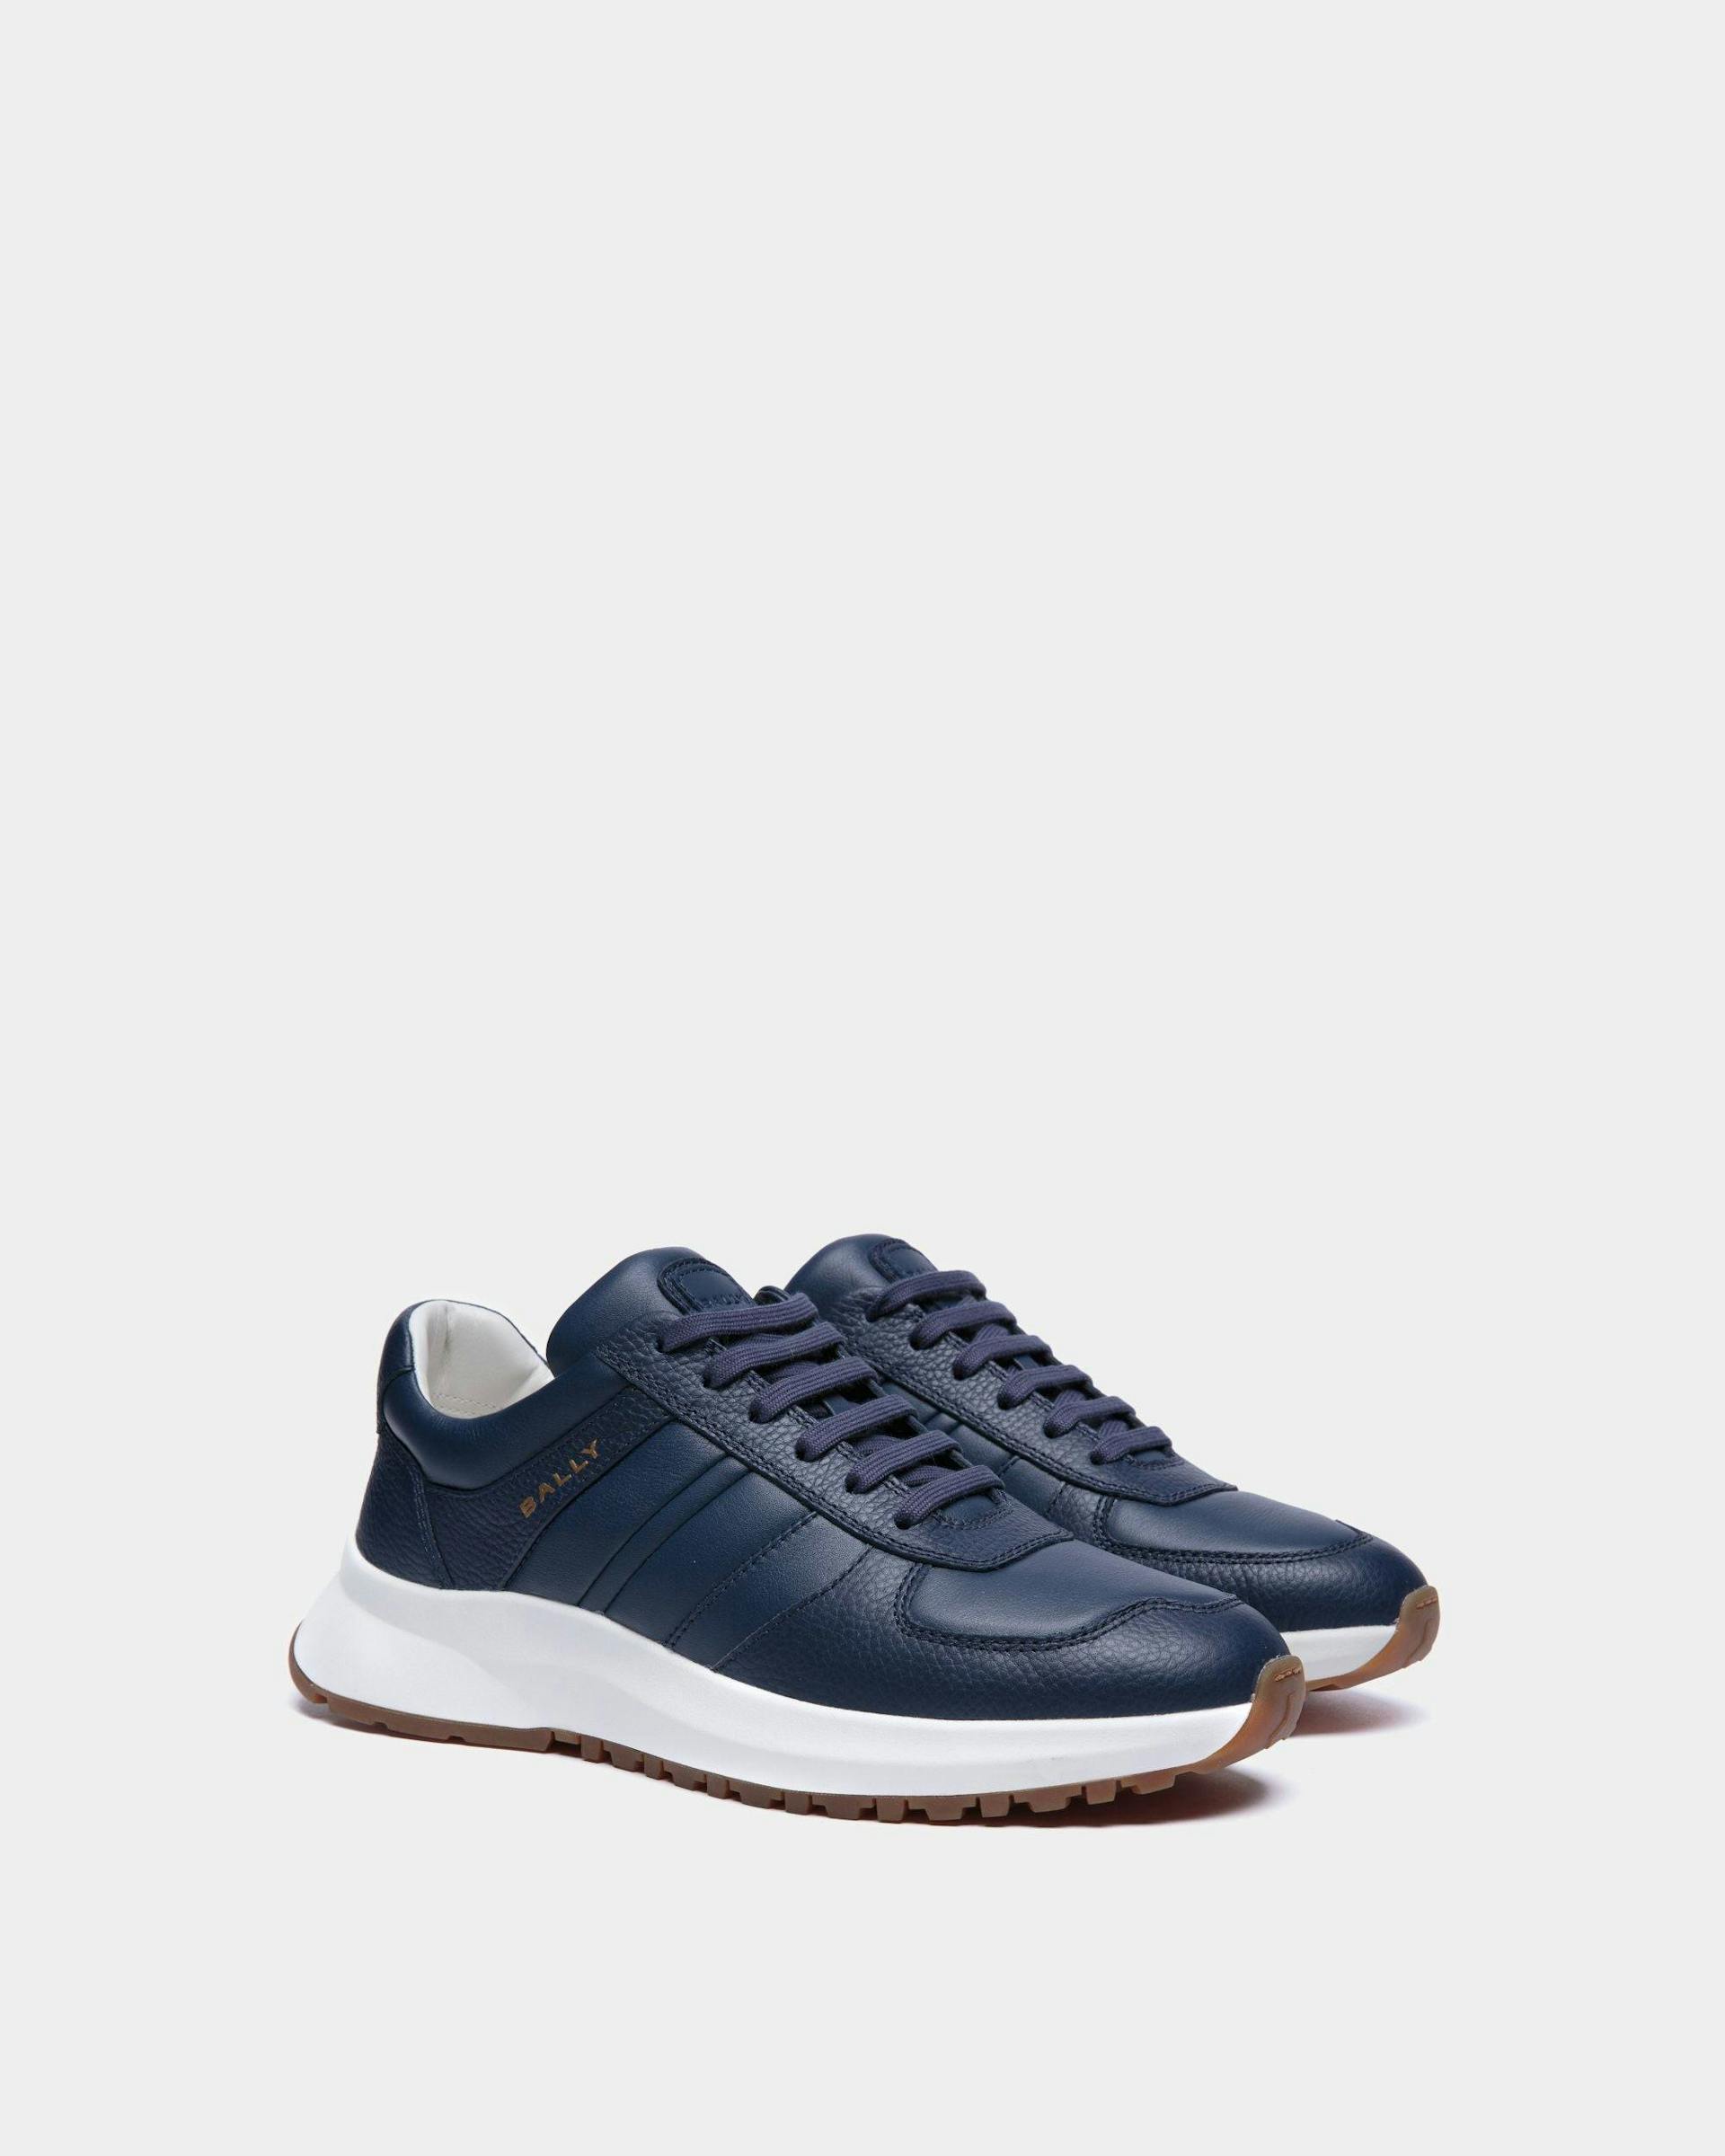 Men's Outline Sneaker In Blue Grained Leather | Bally | Still Life 3/4 Front